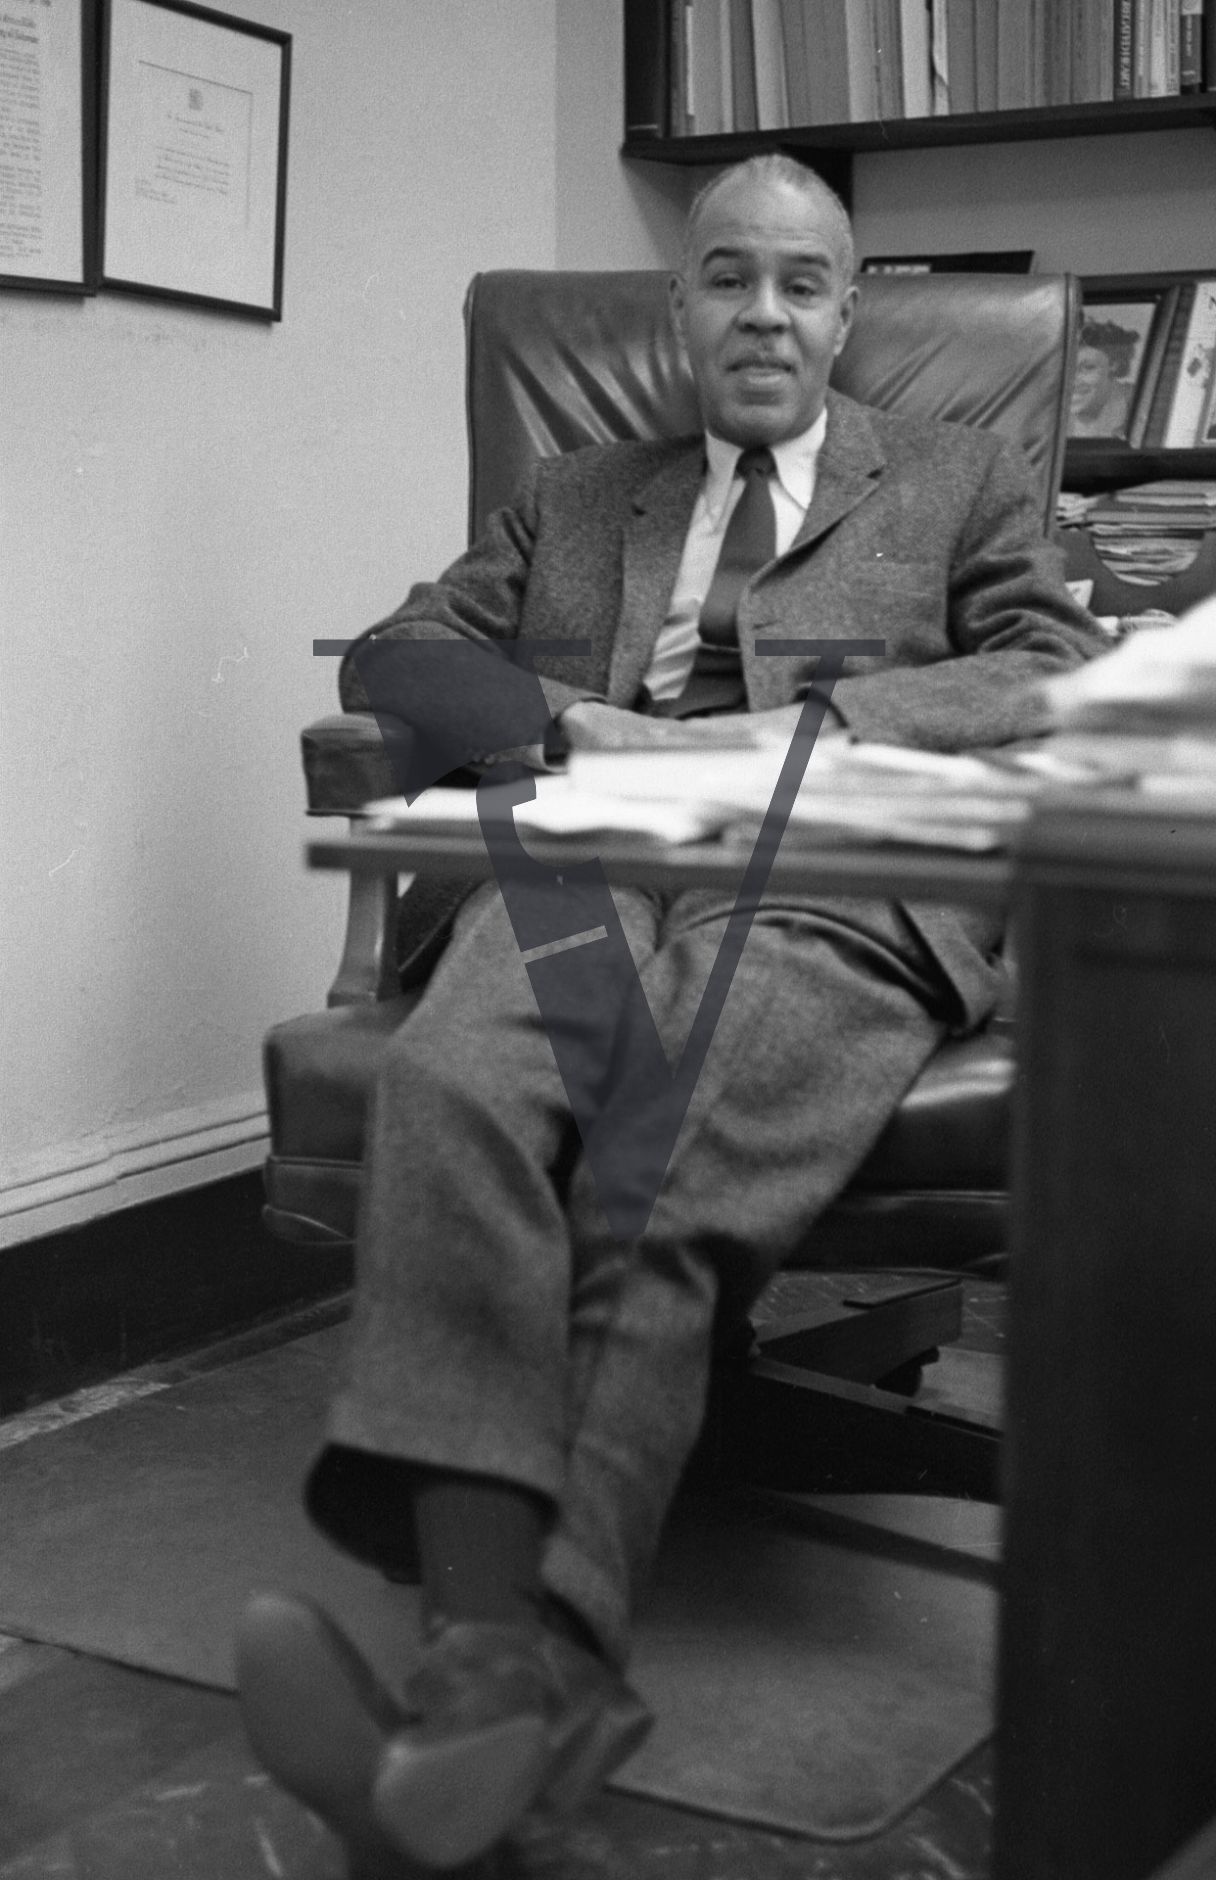 Roy Wilkins, leader, National Association for the Advancement of Colored People, NAACP, portrait at desk.